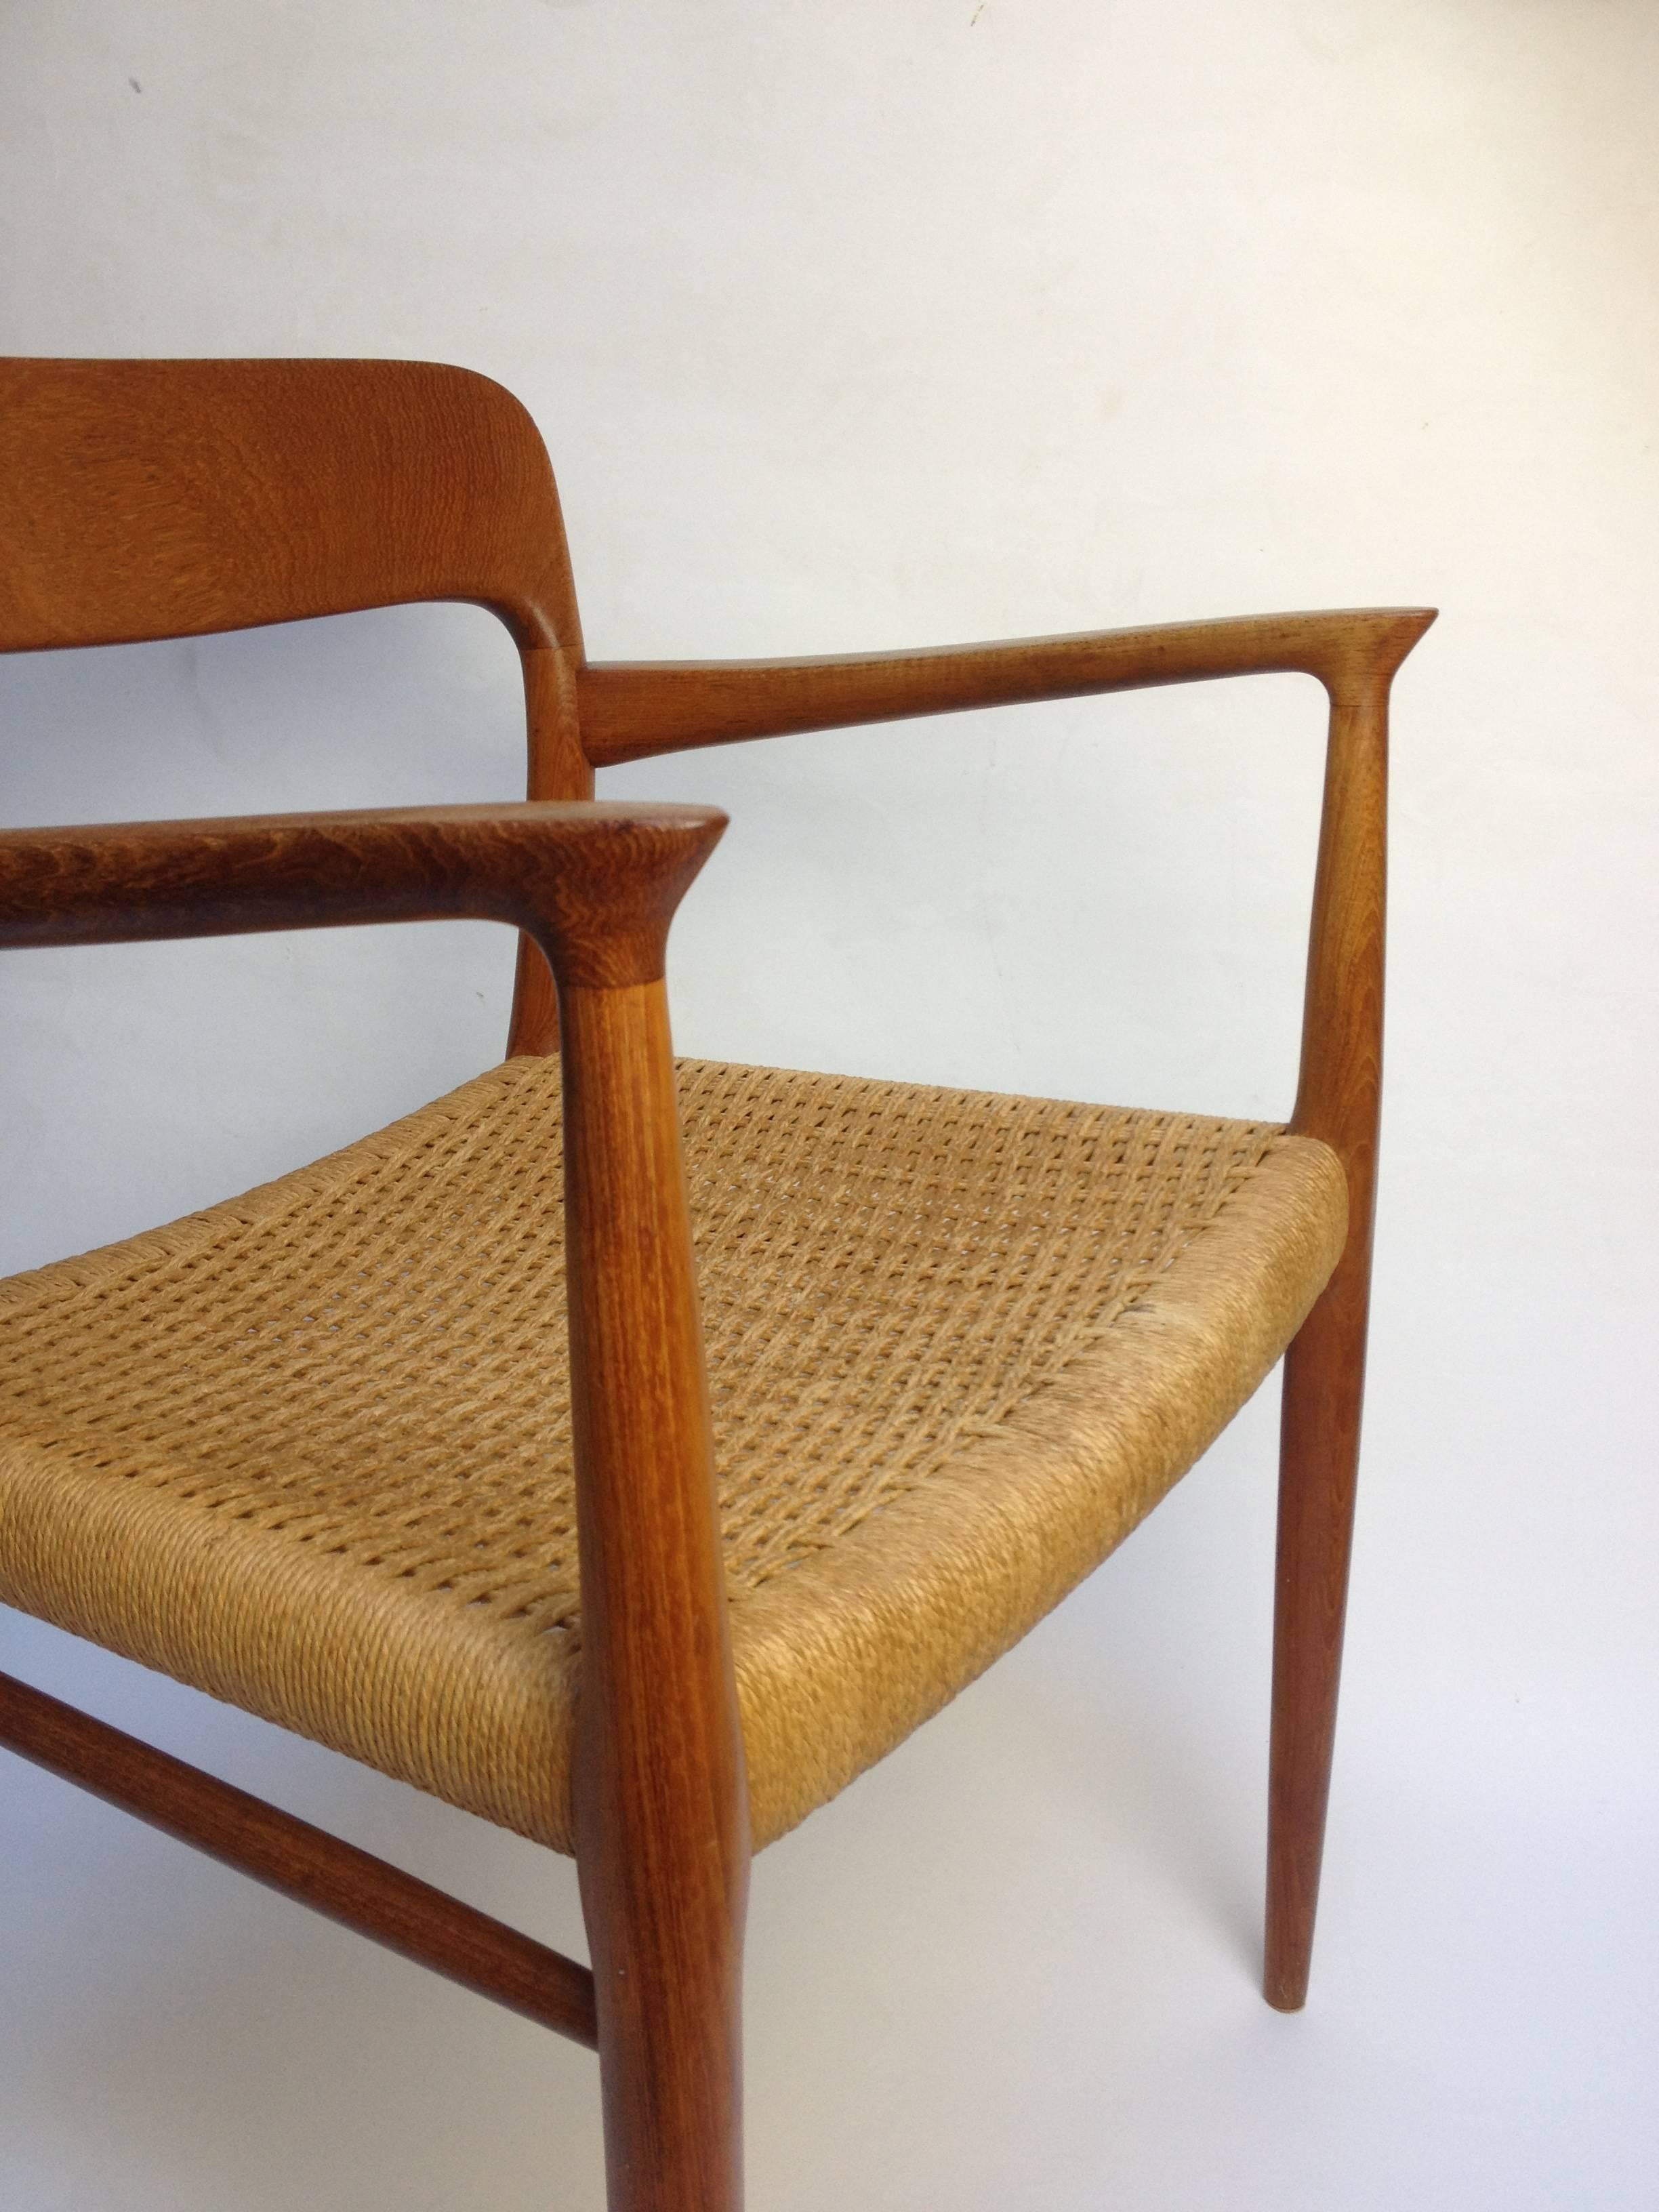 Mid-20th Century 1960s Teak ArmChair, model 56, Designed by Niels Moller for J.L.Moller For Sale